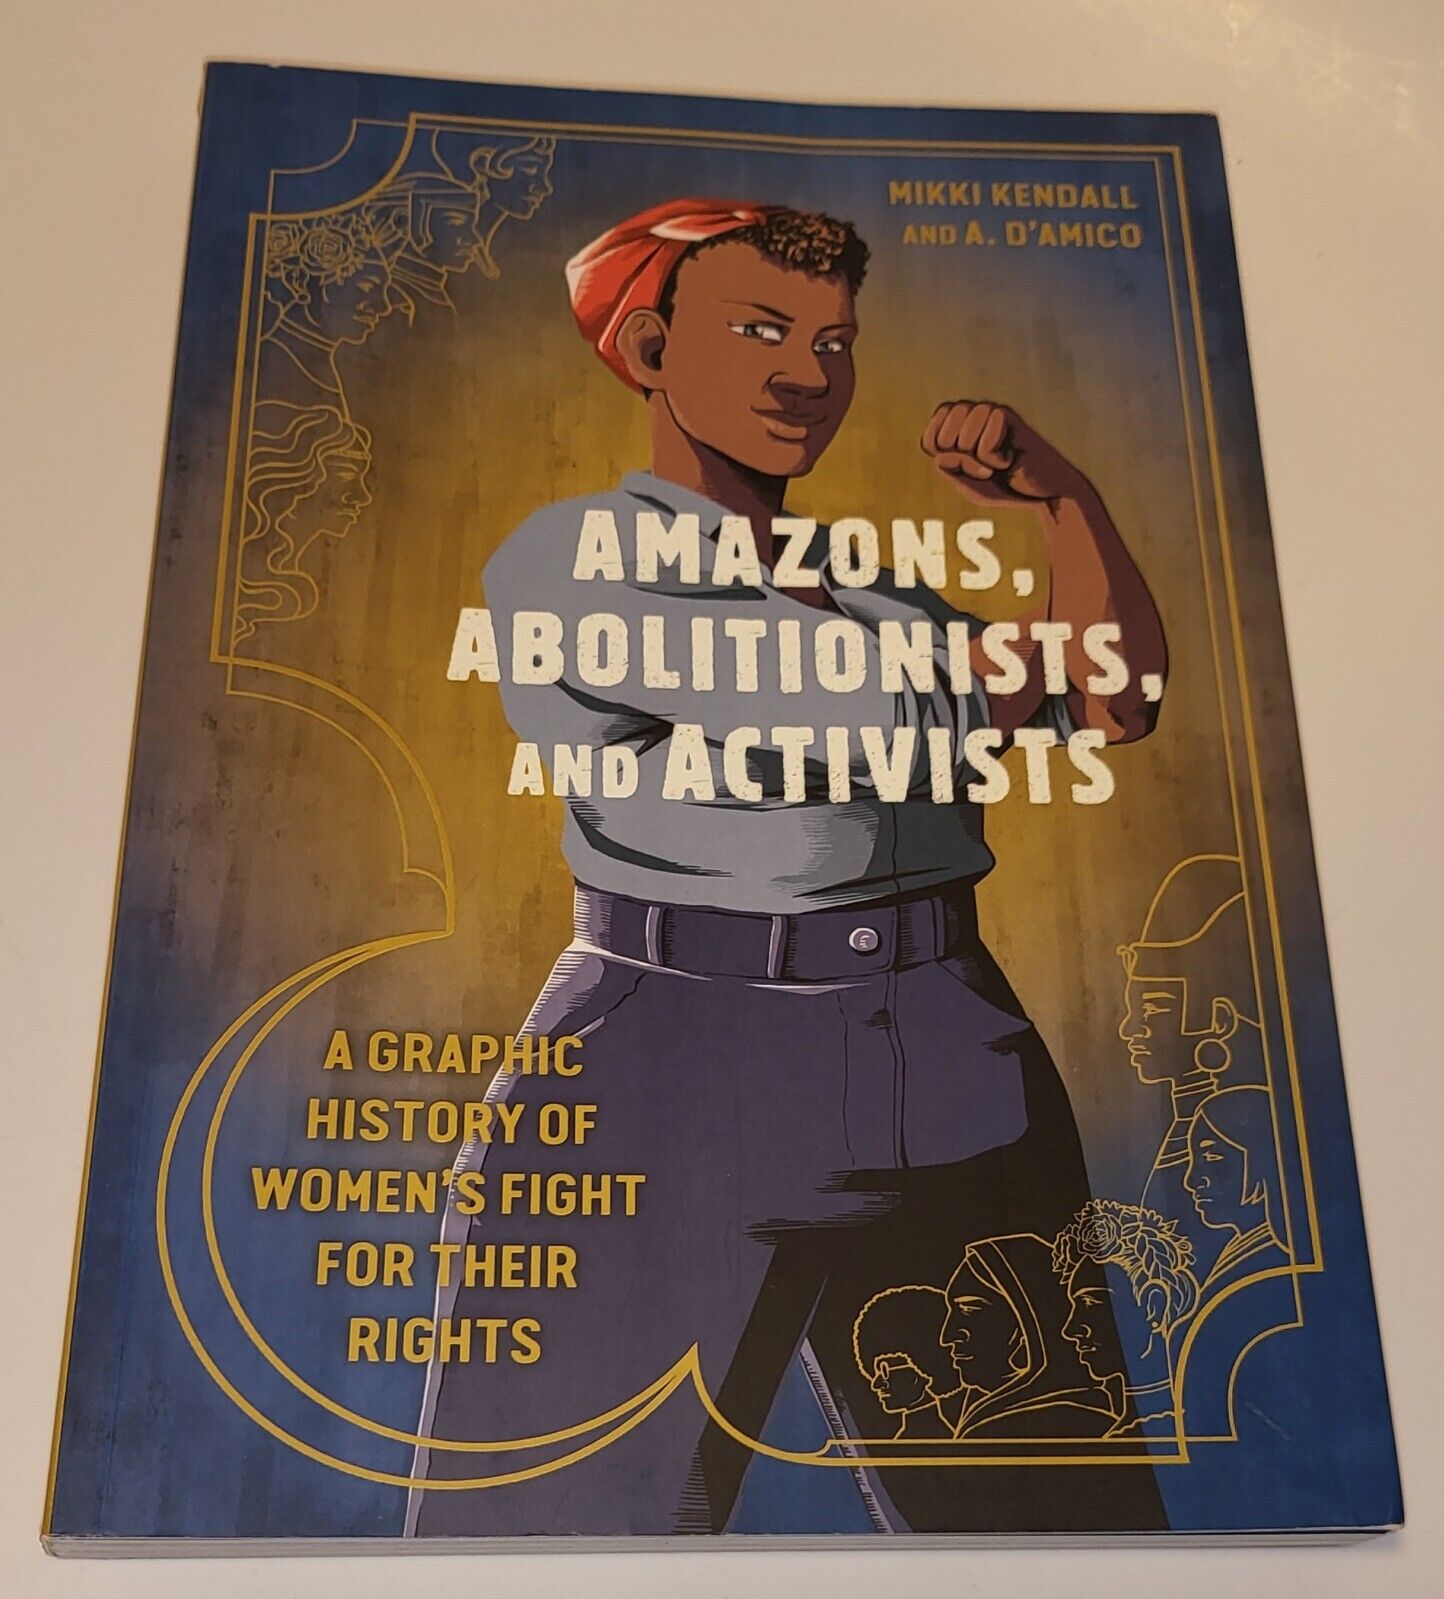 Amazons, Abolitionists, and Activists A Graphic History Women's Fight for Rights